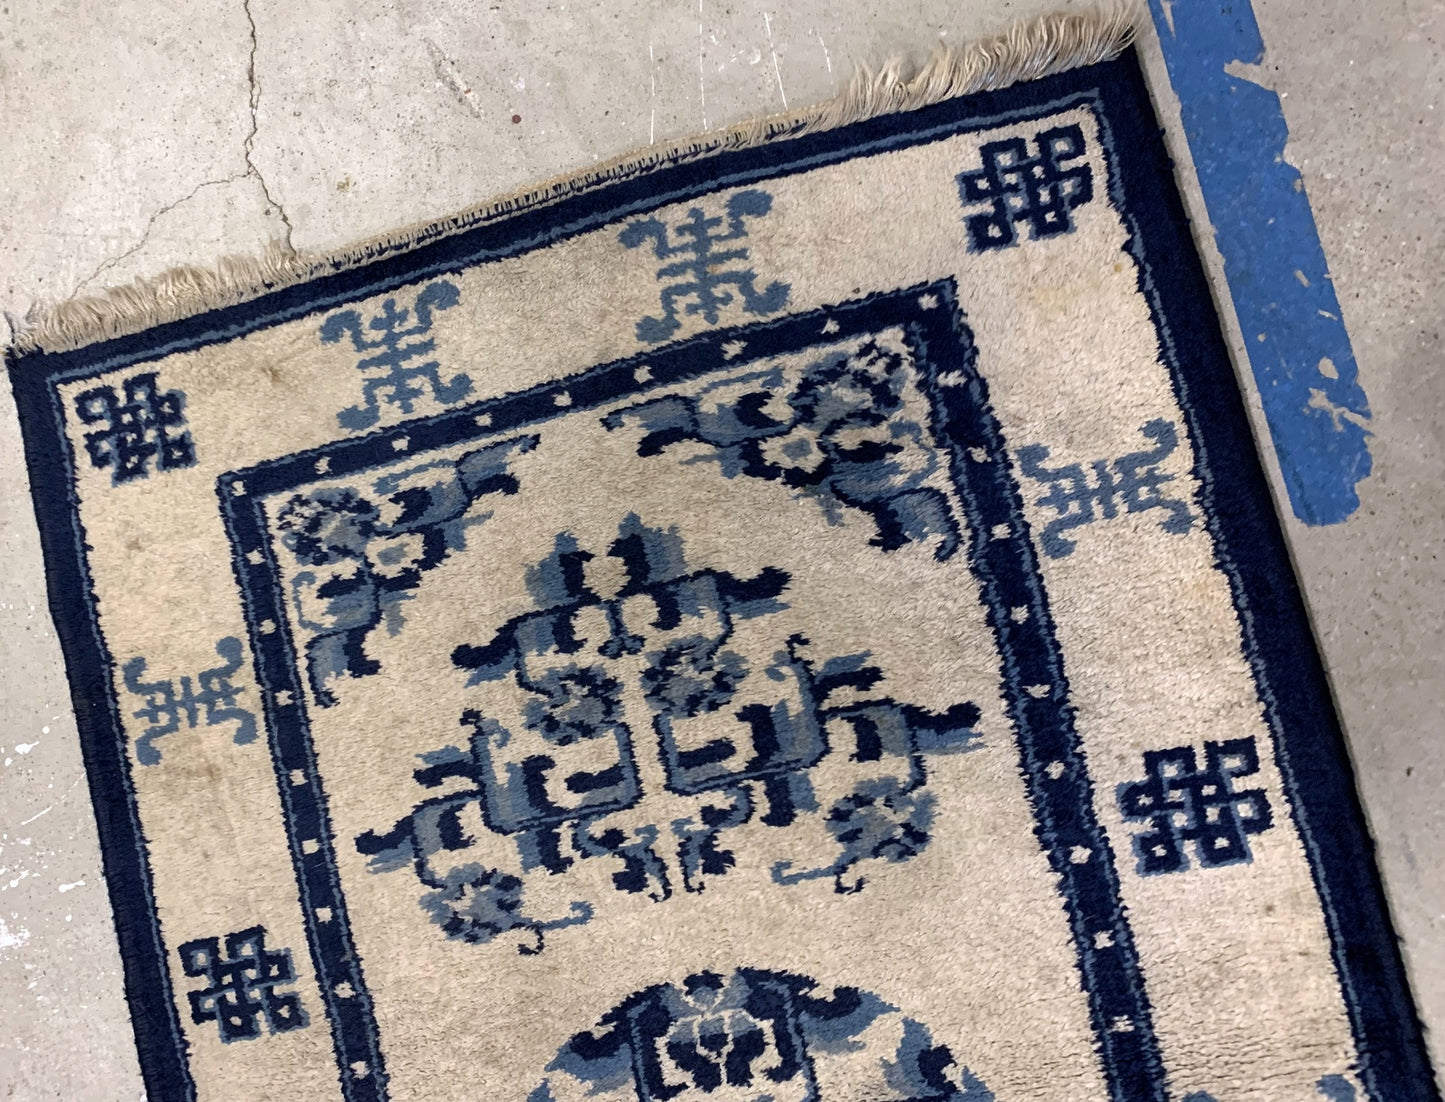 Handmade antique Peking Chinese rug in beige and blue colors. The rug is from the beginning of 20th century in original good condition.